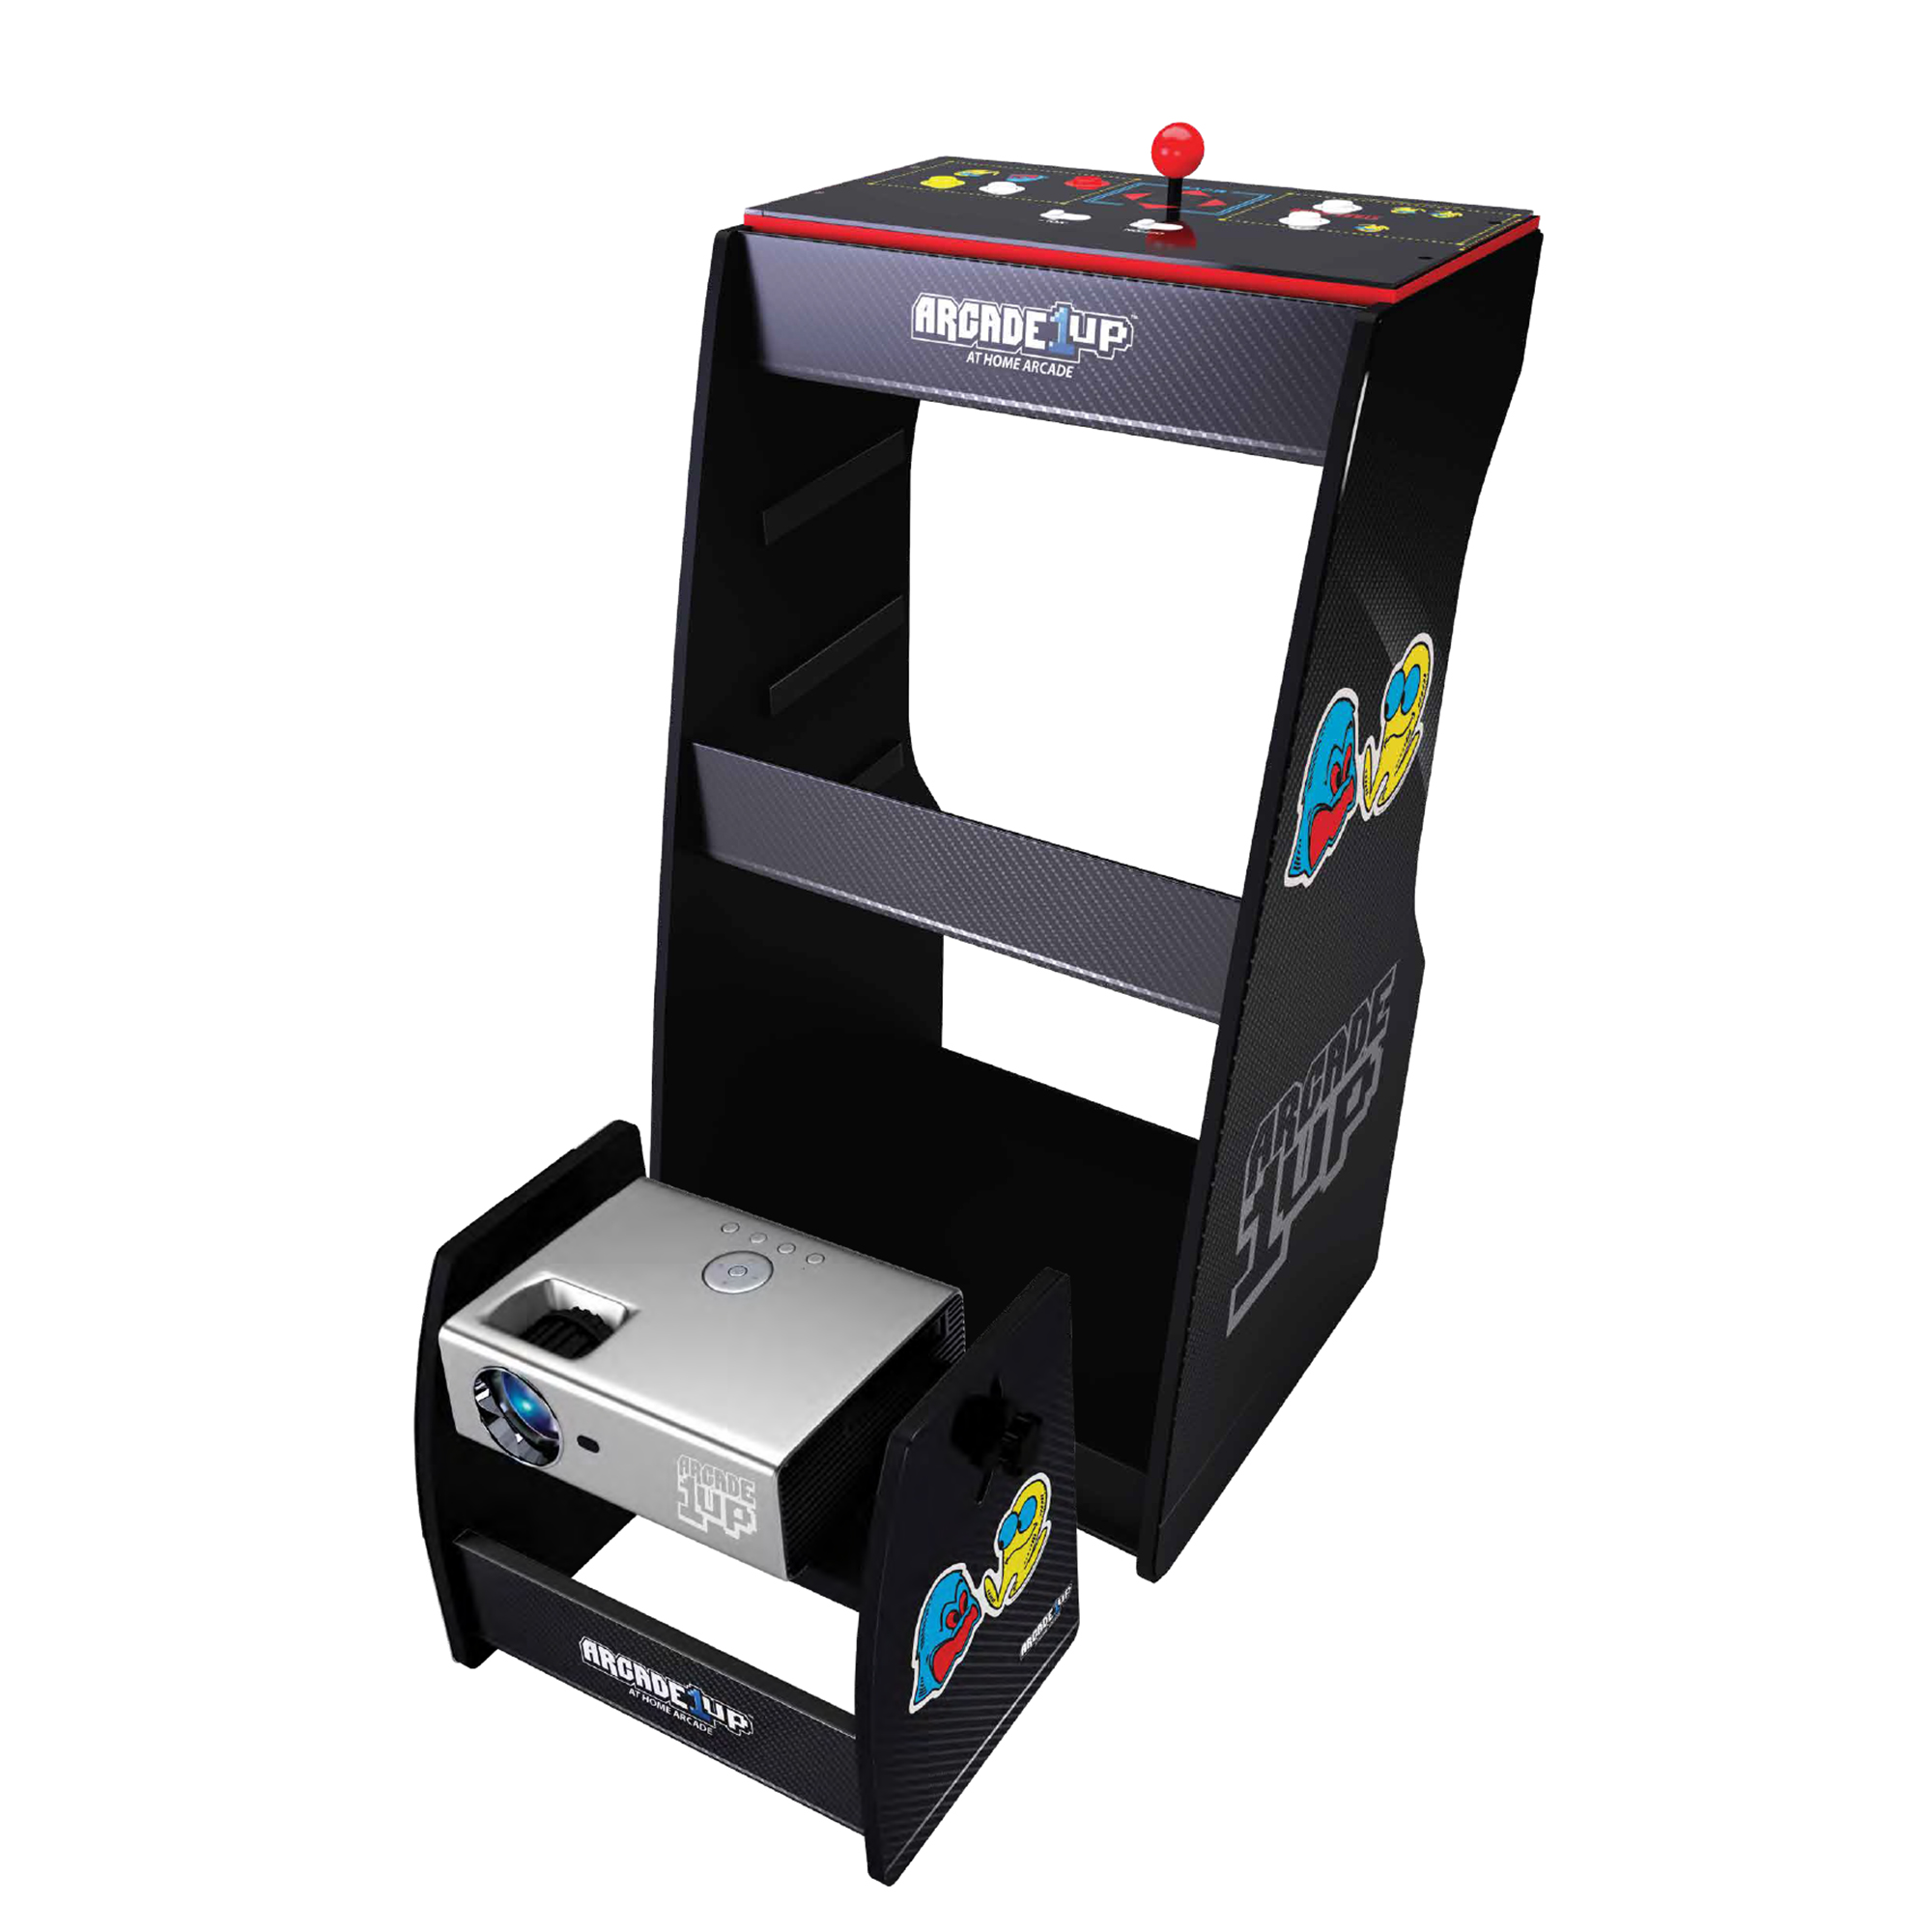 Arcade1Up Projector-Cade, Pac-Man Arcade Game System - image 1 of 7